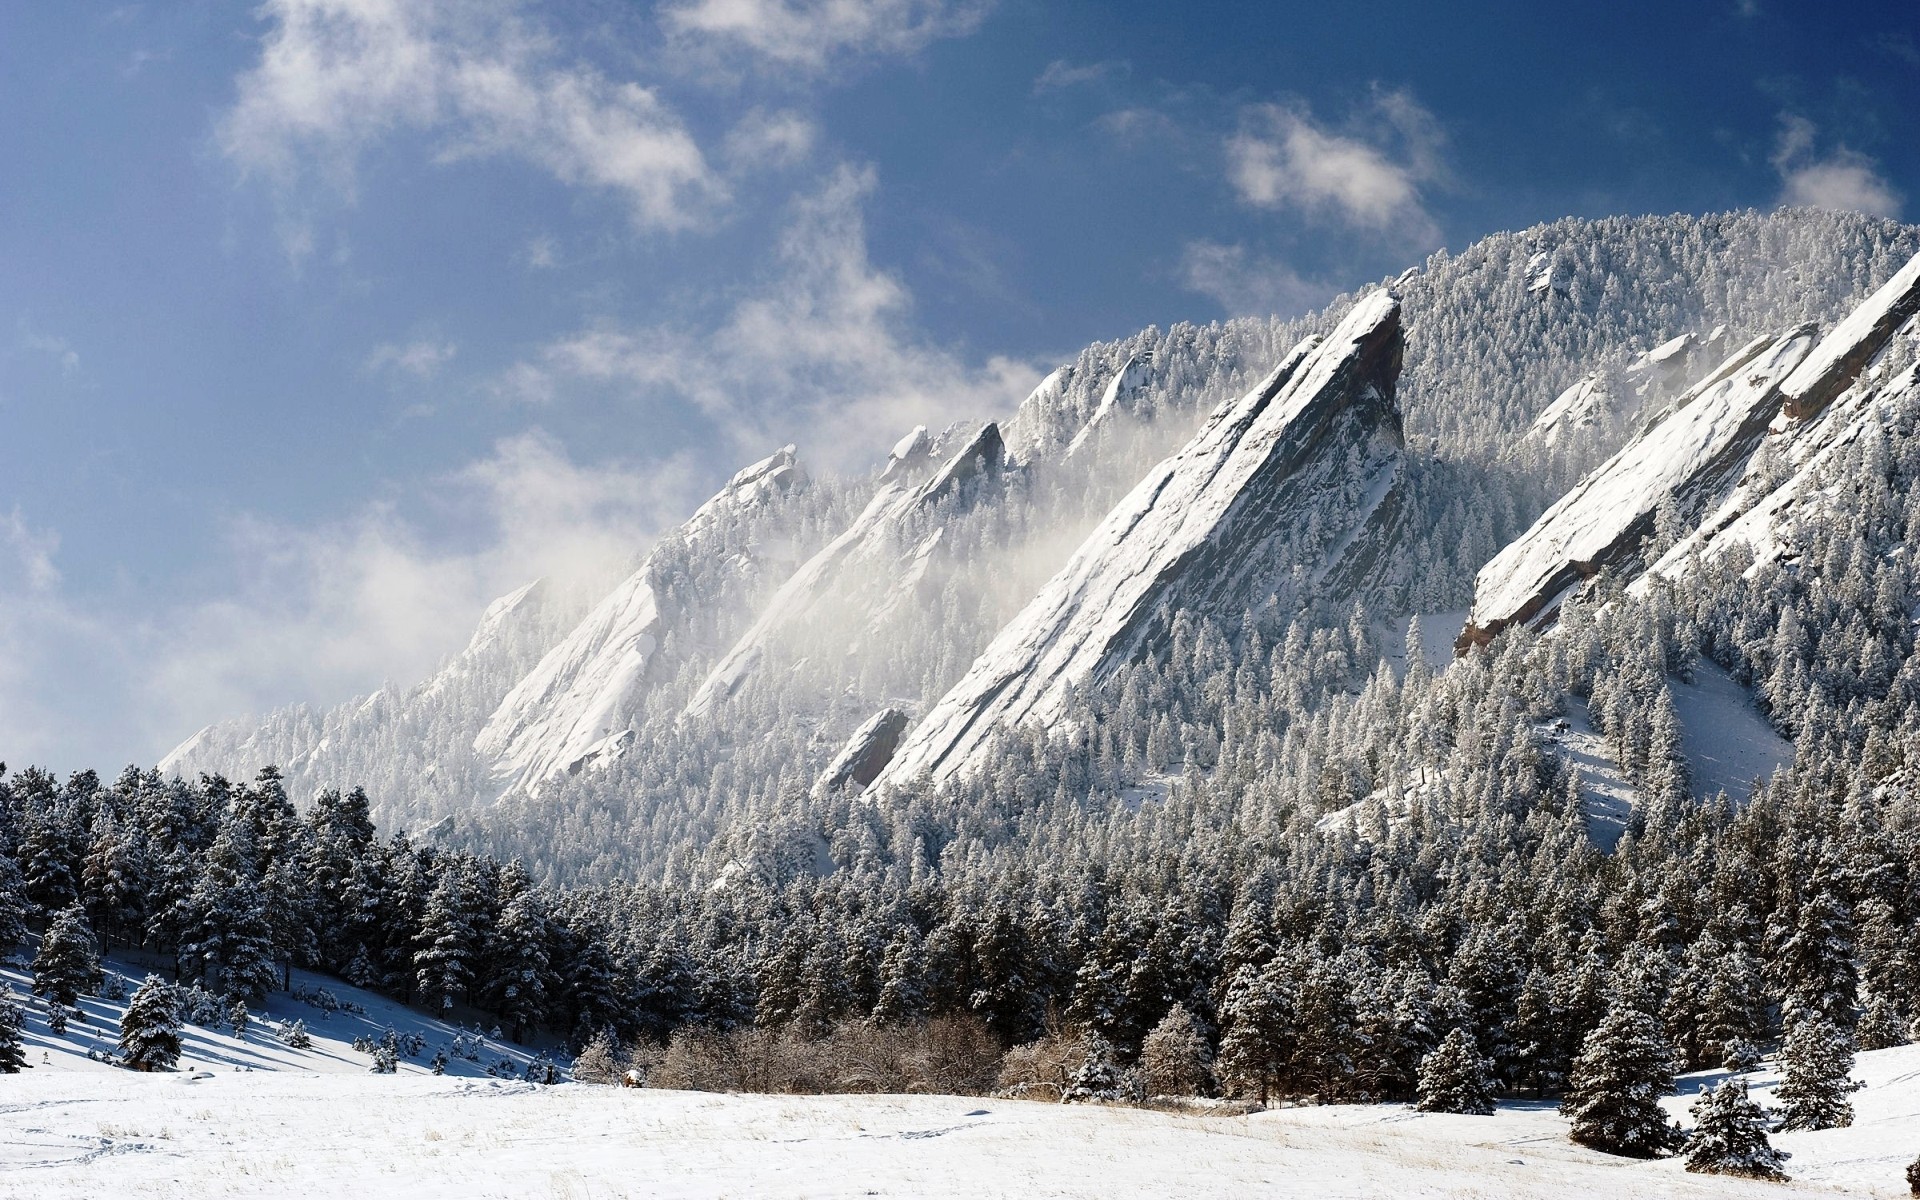 General 1920x1200 nature landscape mountains snow forest Colorado winter pine trees trees Flatirons USA